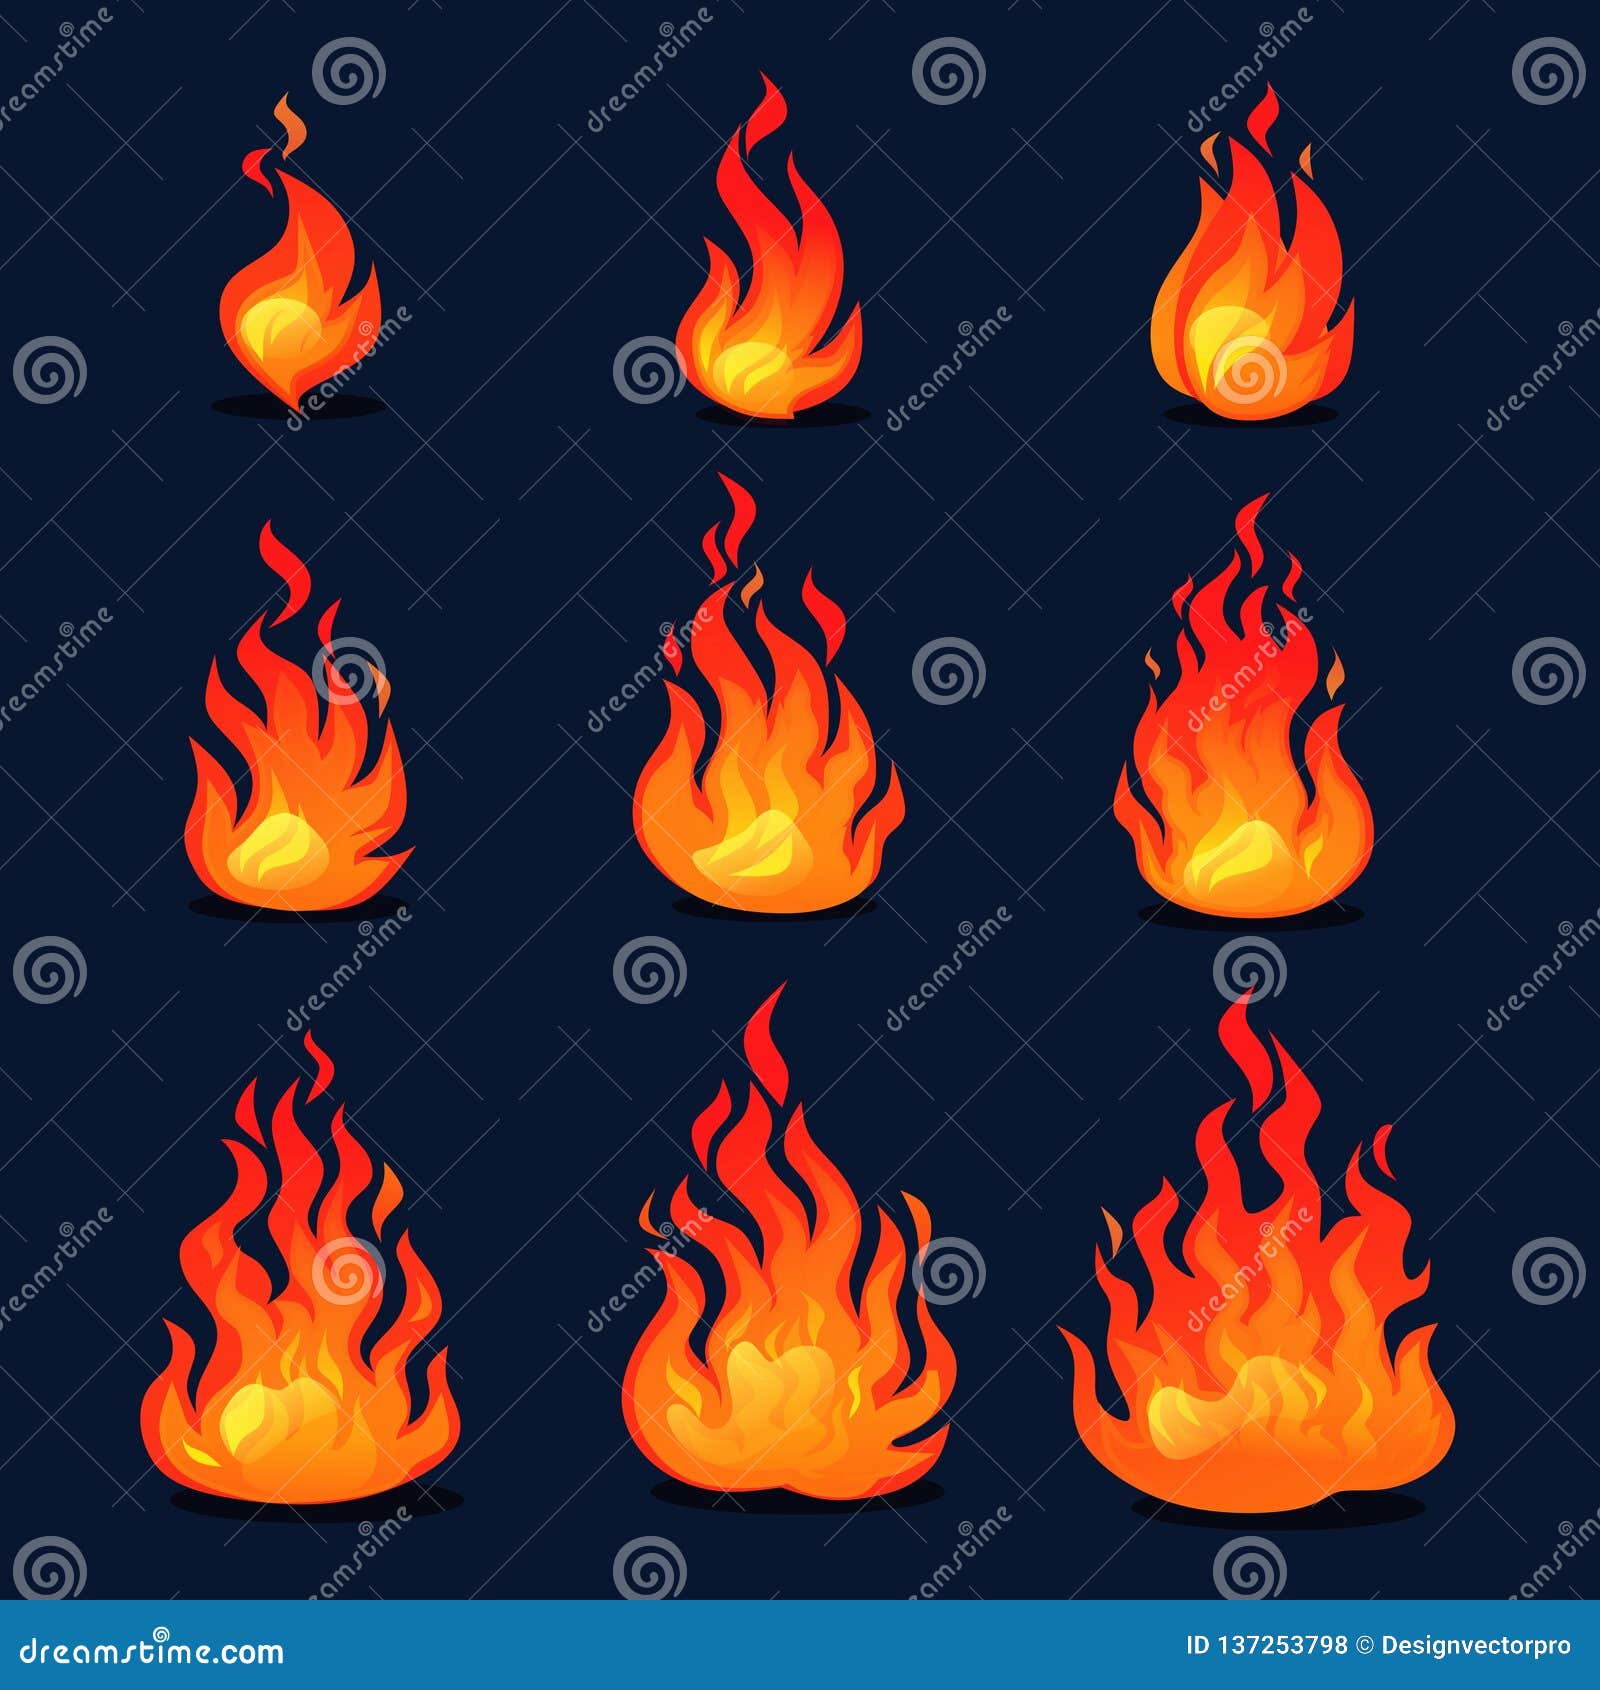 Cartoon Fire Animation Design. Vector Fireplace Illustration for Animation,  Games Etc Stock Vector - Illustration of firewood, isolated: 137253798